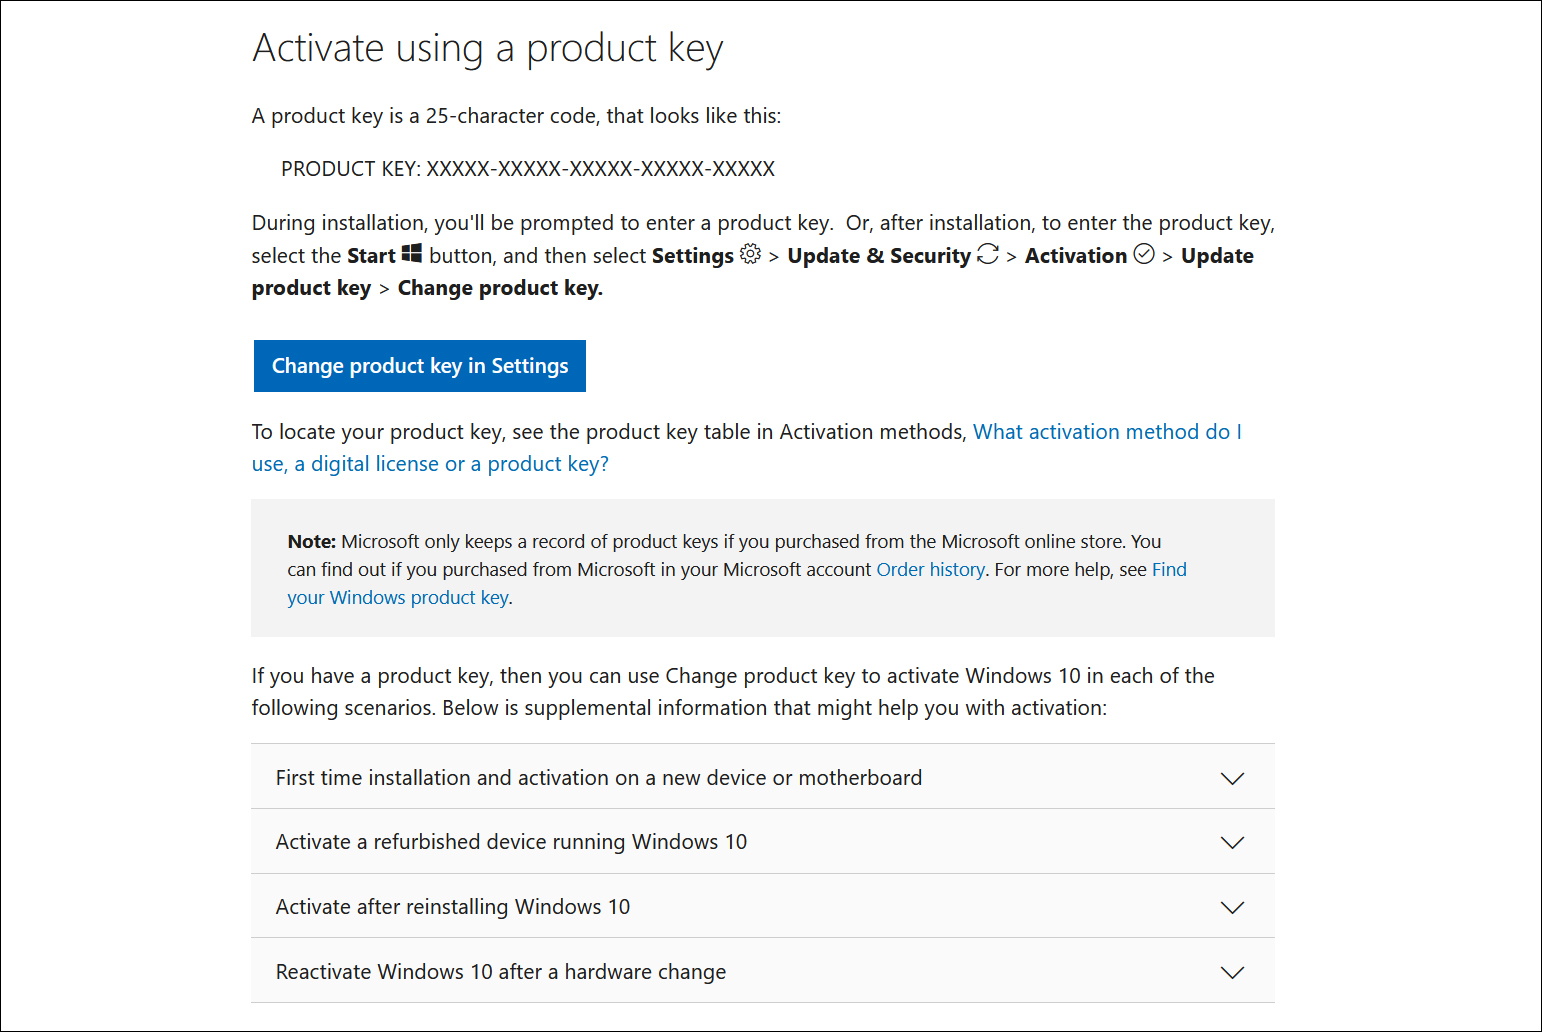 Screenshot from Microsoft's Windows activation support page